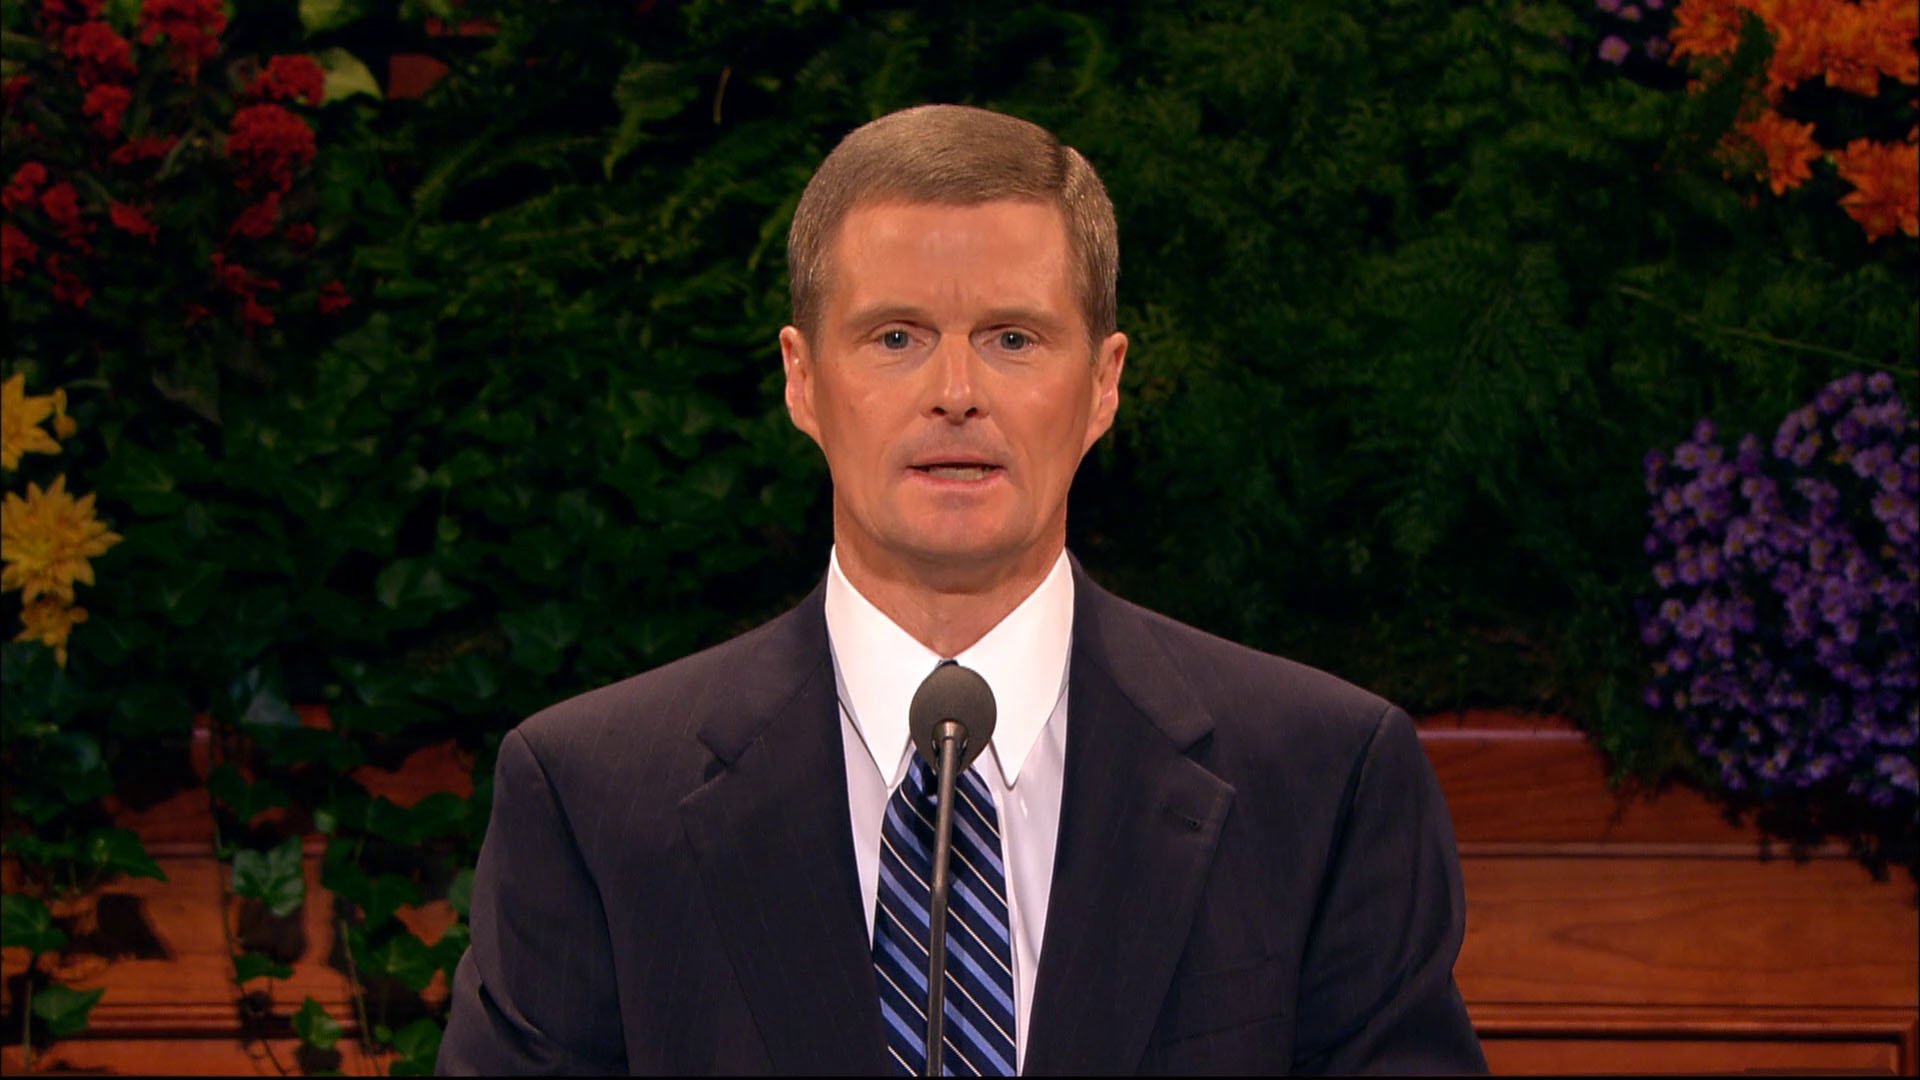 A photo of Elder David A. Bednar standing at the pulpit in the General Conference Center.